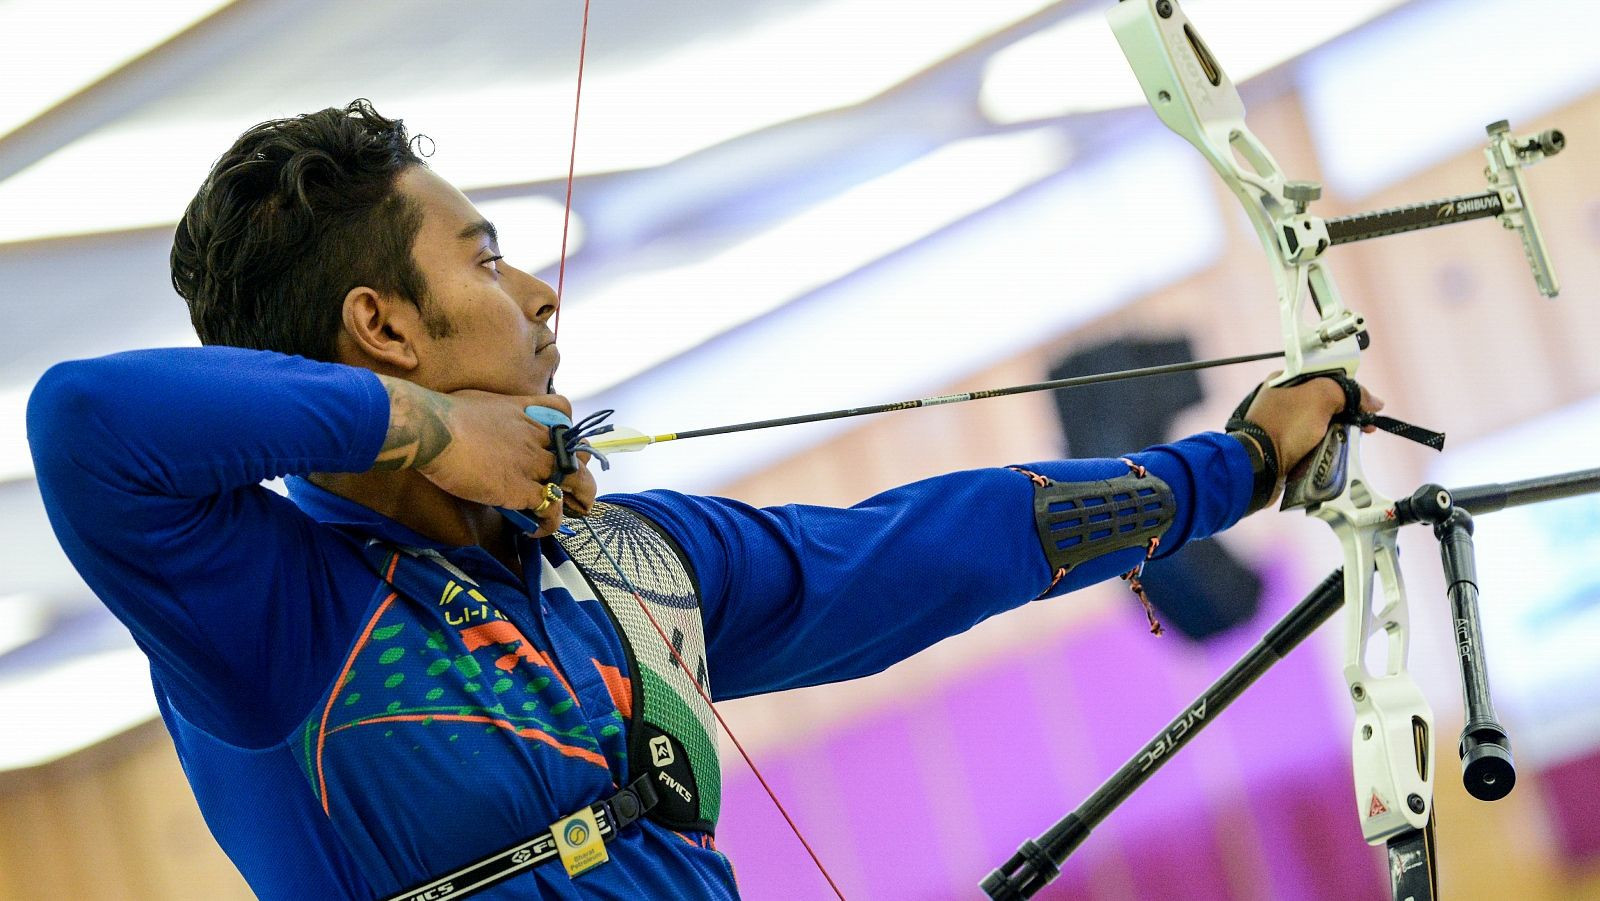 India's Atanu Das topped the men's recurve qualification in Bangkok ©World Archery